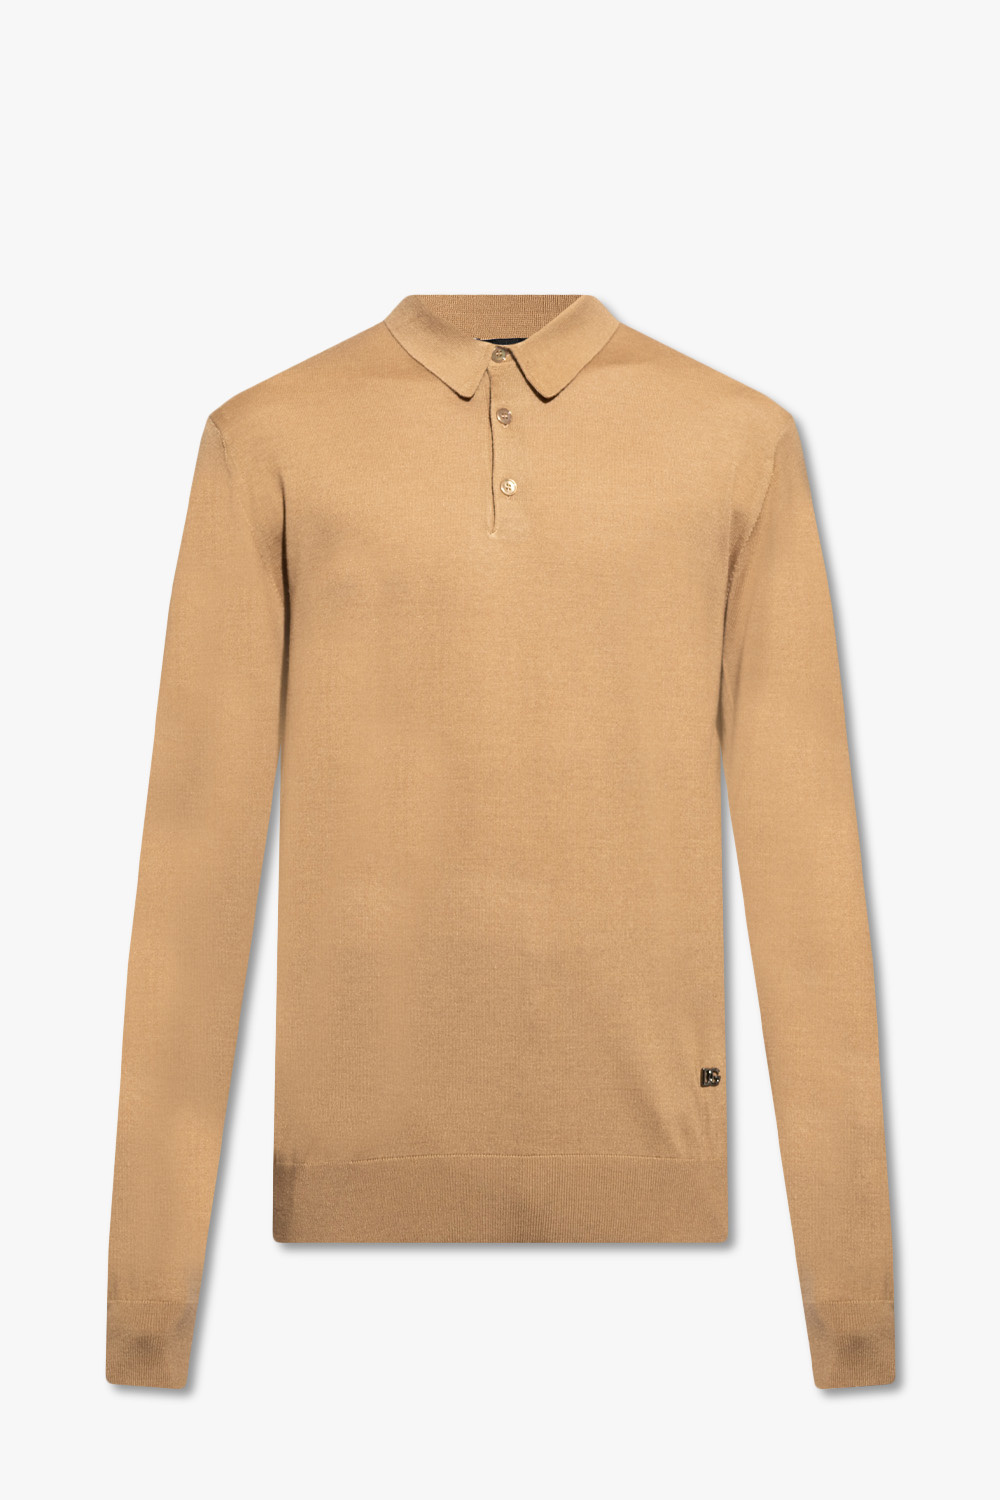 Dolce & Gabbana polo In10 shirt with long sleeves